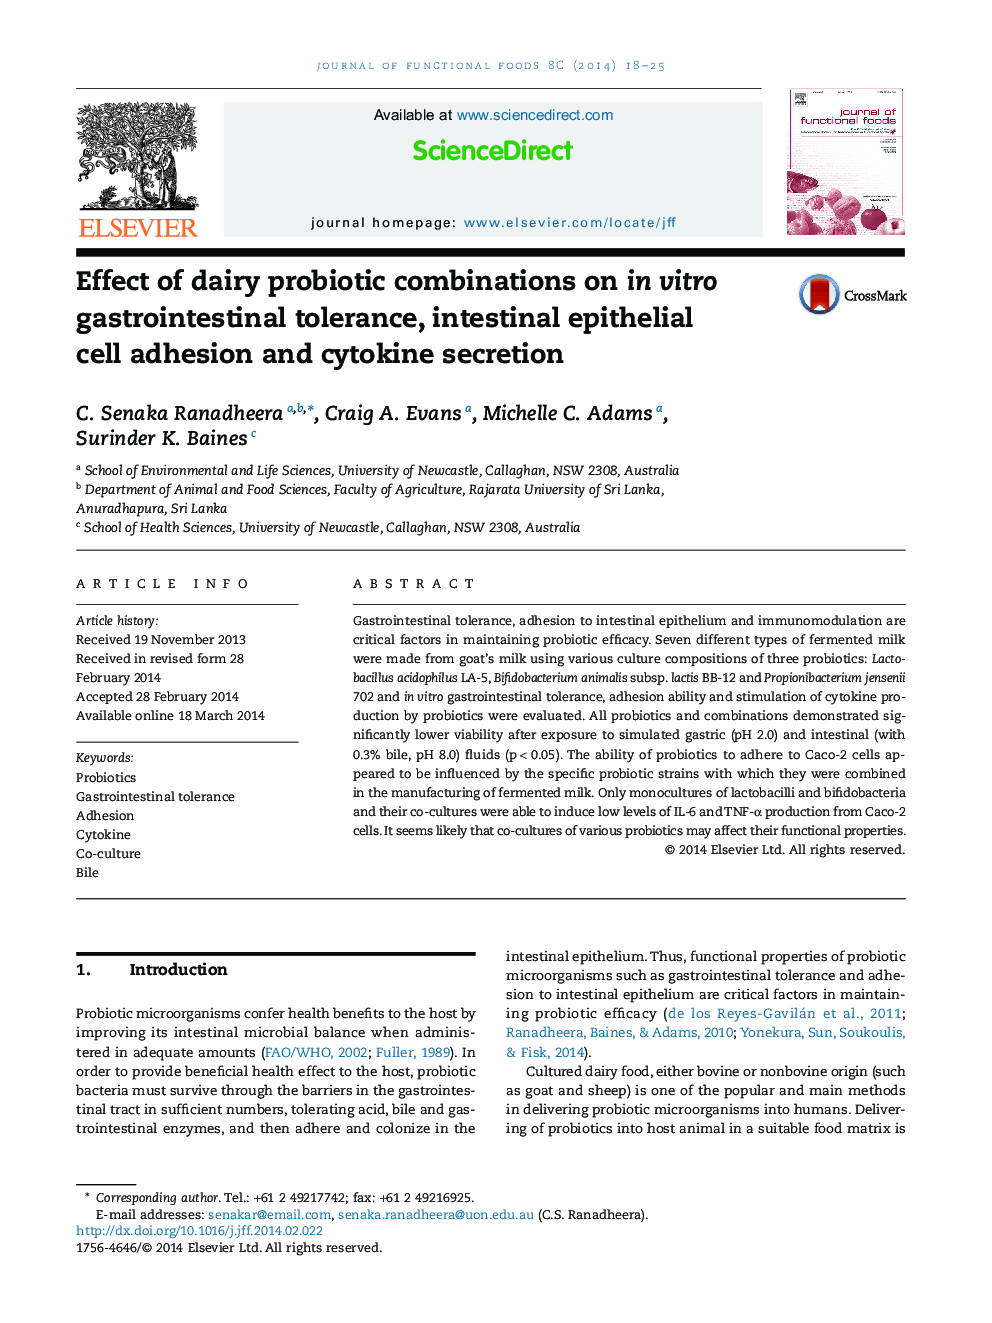 Effect of dairy probiotic combinations on in vitro gastrointestinal tolerance, intestinal epithelial cell adhesion and cytokine secretion